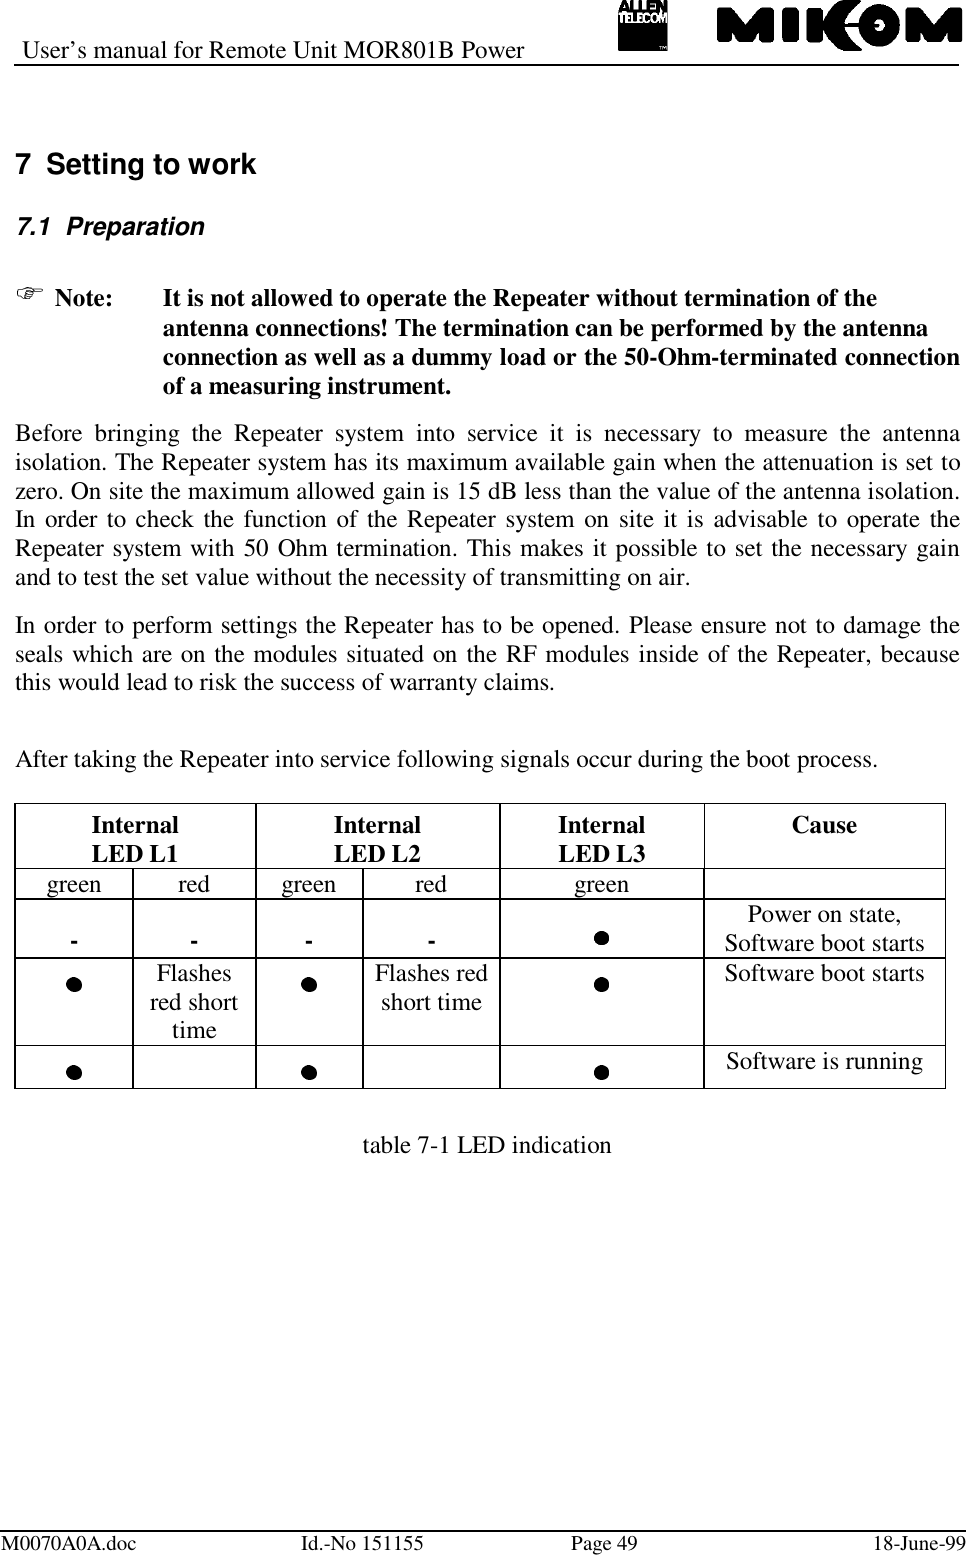 User’s manual for Remote Unit MOR801B PowerM0070A0A.doc Id.-No 151155 Page 49 18-June-997  Setting to work7.1 Preparation Note: It is not allowed to operate the Repeater without termination of the antenna connections! The termination can be performed by the antenna connection as well as a dummy load or the 50-Ohm-terminated connectionof a measuring instrument.Before bringing the Repeater system into service it is necessary to measure the antennaisolation. The Repeater system has its maximum available gain when the attenuation is set tozero. On site the maximum allowed gain is 15 dB less than the value of the antenna isolation.In order to check the function of the Repeater system on site it is advisable to operate theRepeater system with 50 Ohm termination. This makes it possible to set the necessary gainand to test the set value without the necessity of transmitting on air.In order to perform settings the Repeater has to be opened. Please ensure not to damage theseals which are on the modules situated on the RF modules inside of the Repeater, becausethis would lead to risk the success of warranty claims.After taking the Repeater into service following signals occur during the boot process.InternalLED L1 InternalLED L2 InternalLED L3 Causegreen red green red green---- Power on state,Software boot startsFlashesred shorttimeFlashes redshort time Software boot startsSoftware is runningtable 7-1 LED indication